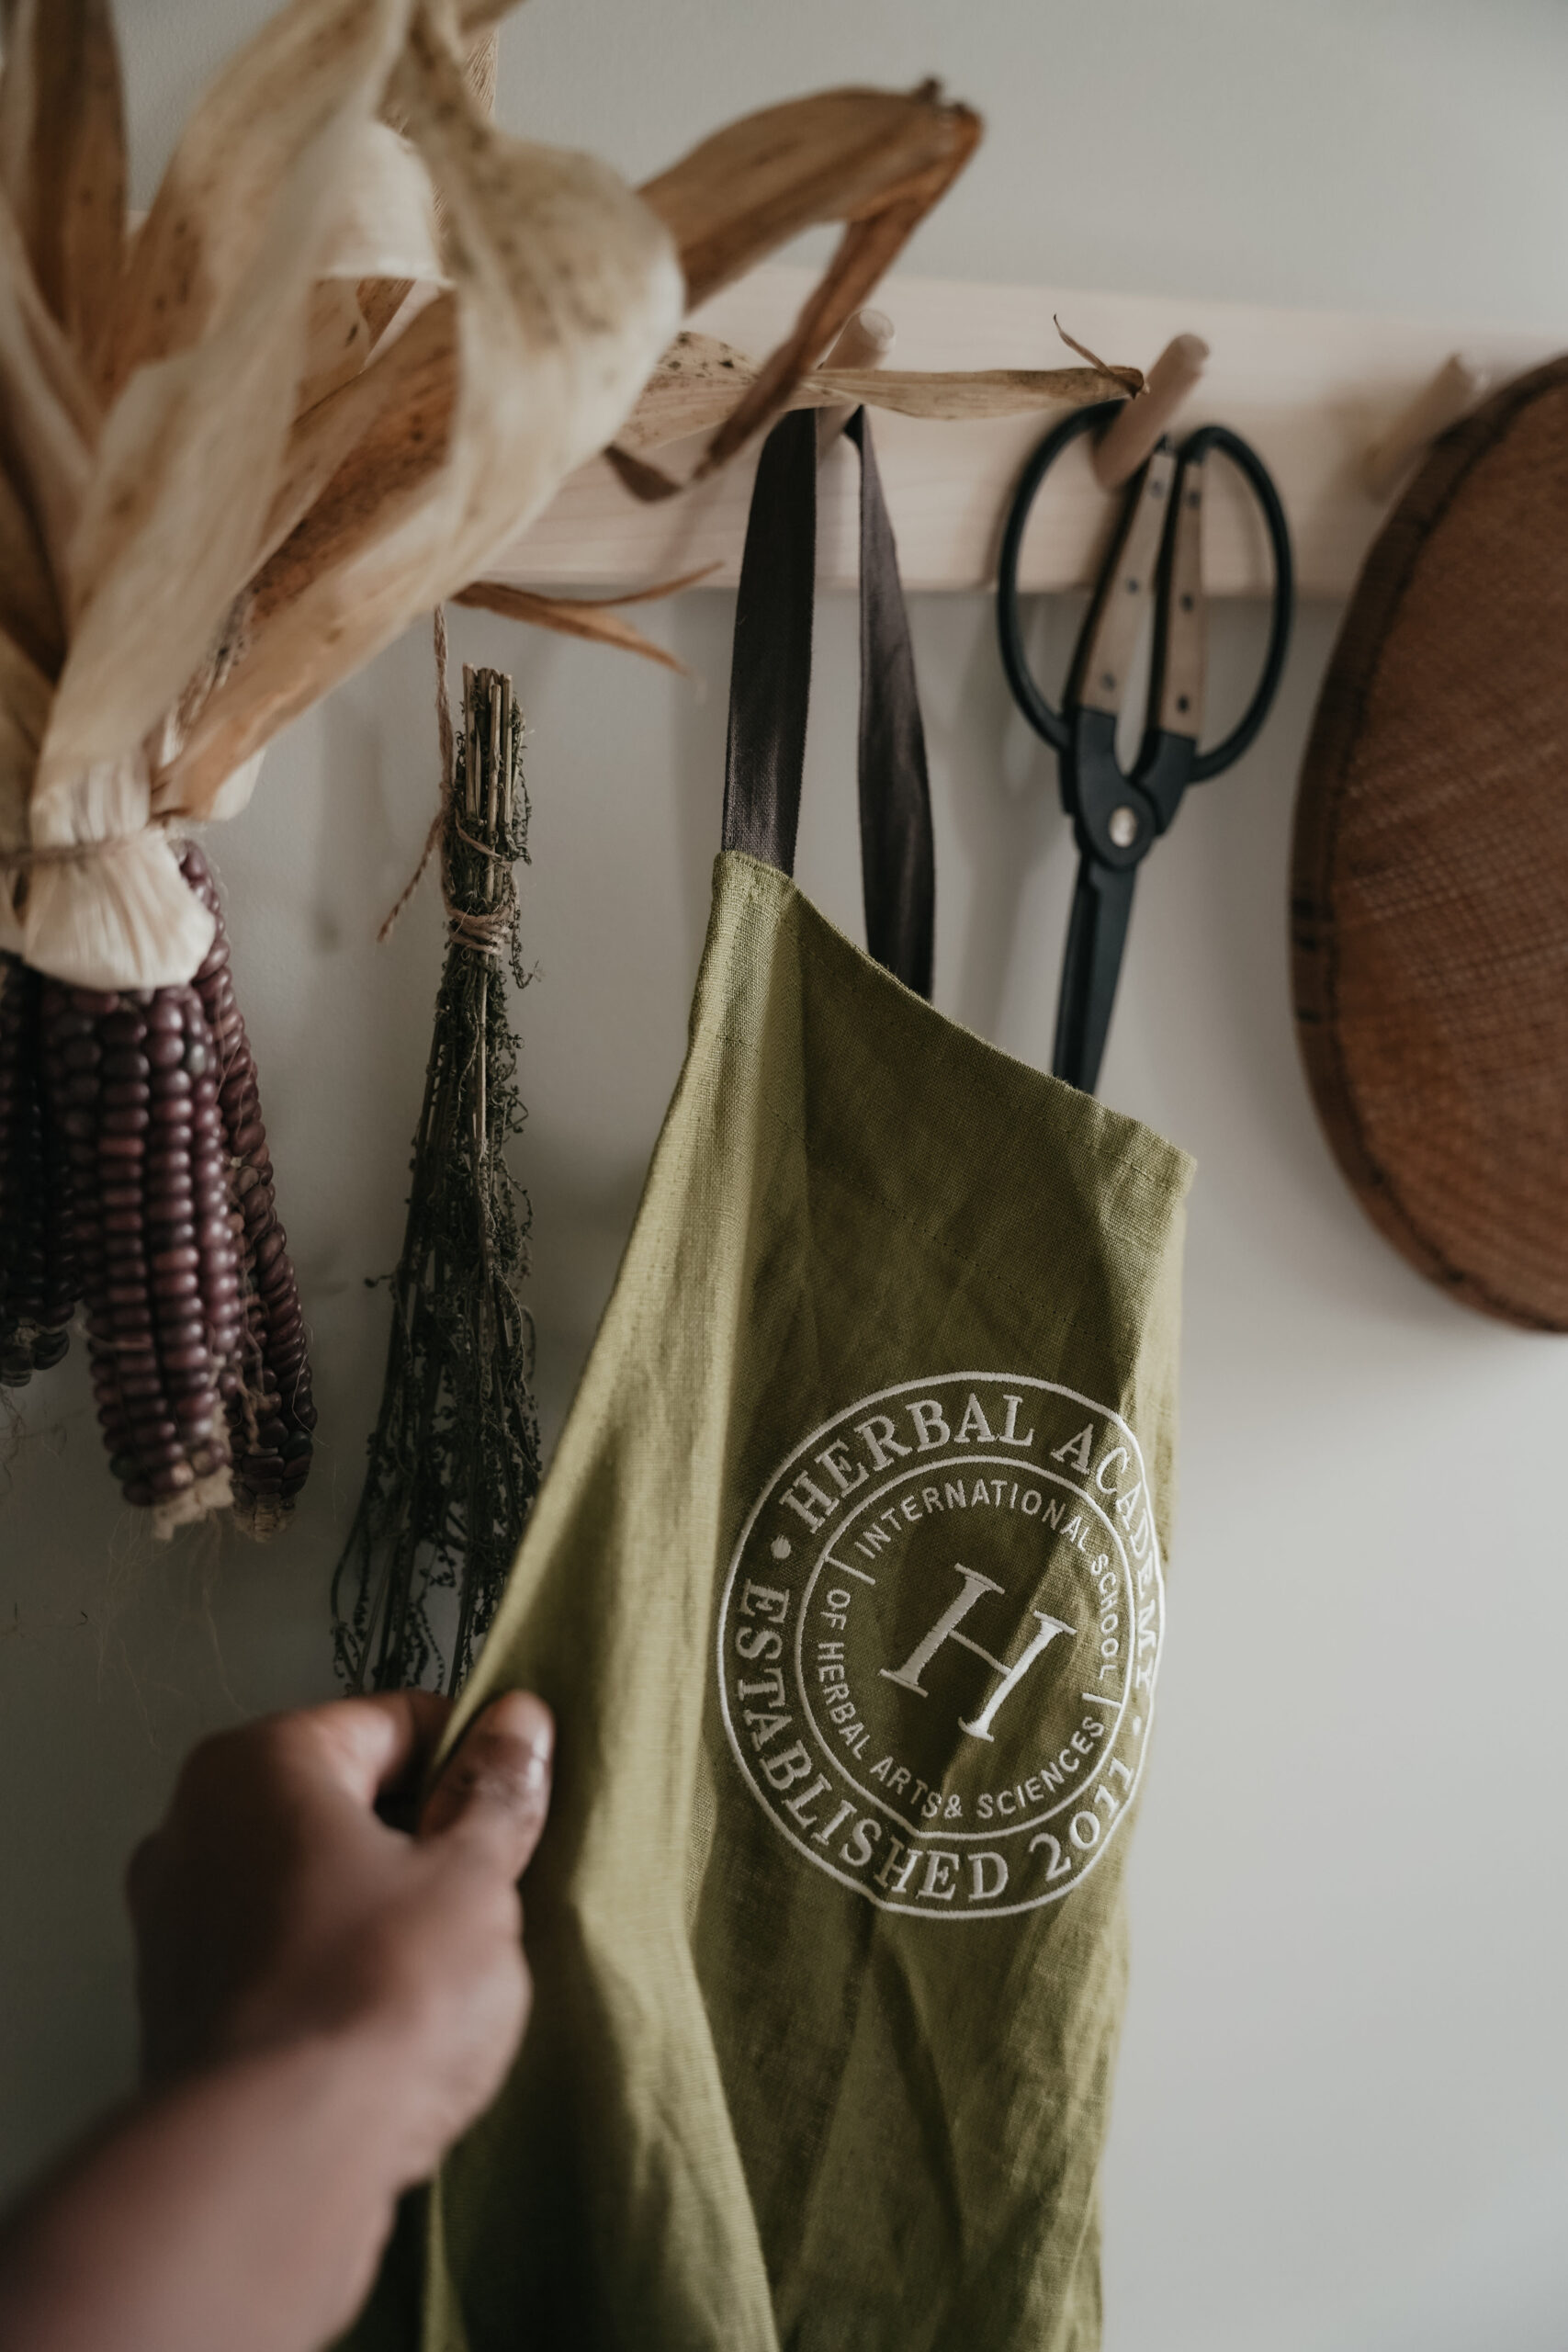 Earthy Green Apron for herbalists - by Herbal Academy